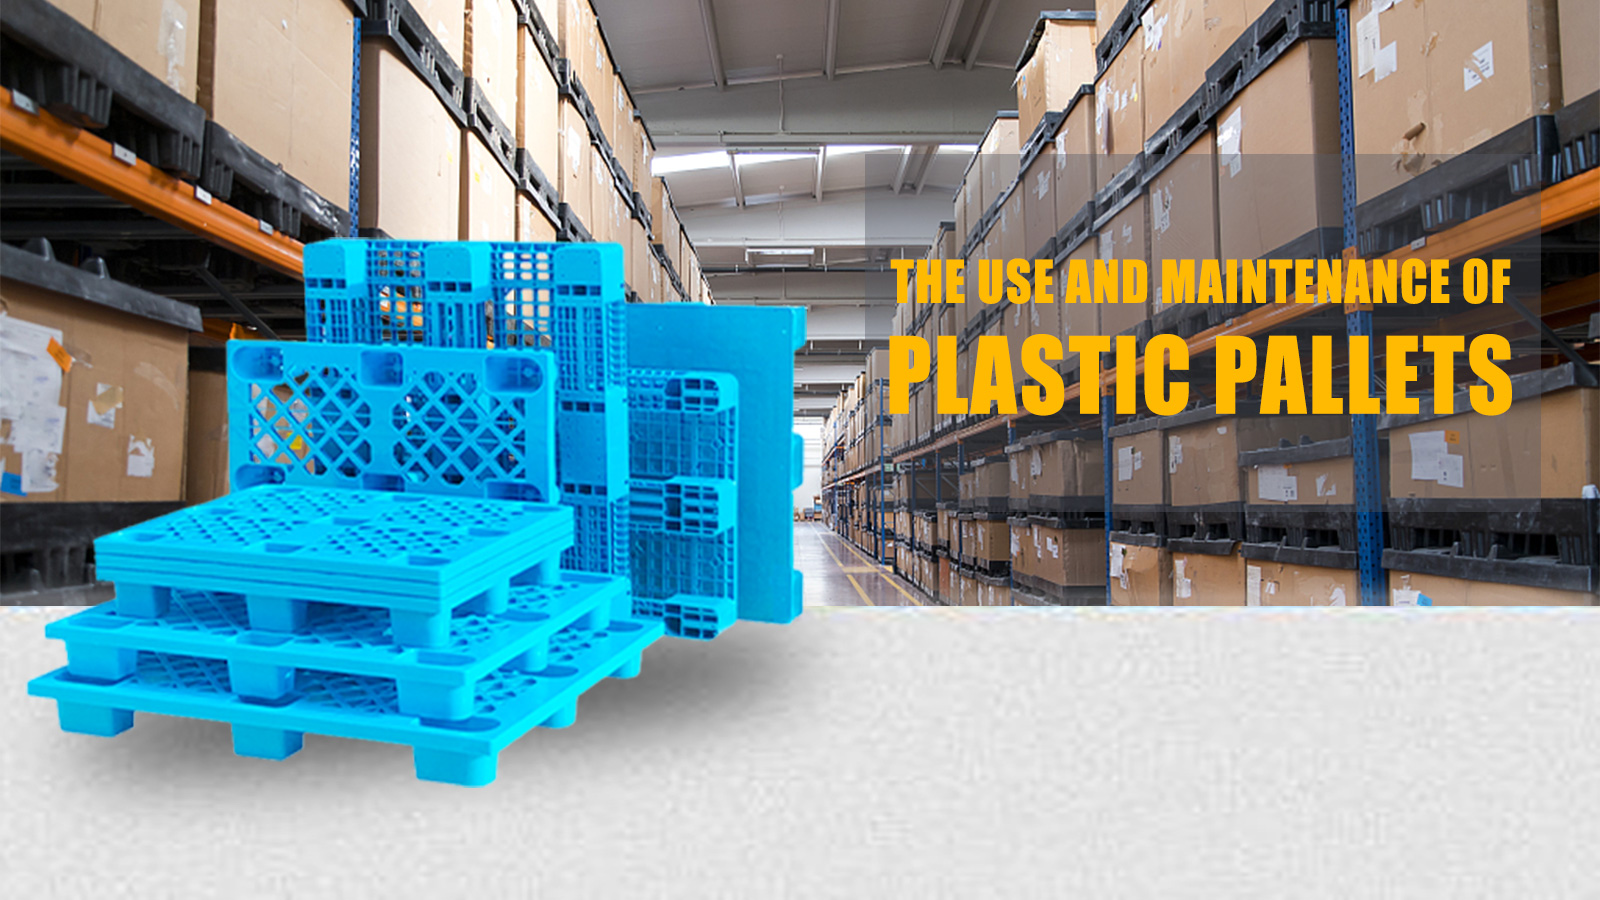 The use and maintenance of plastic pallets